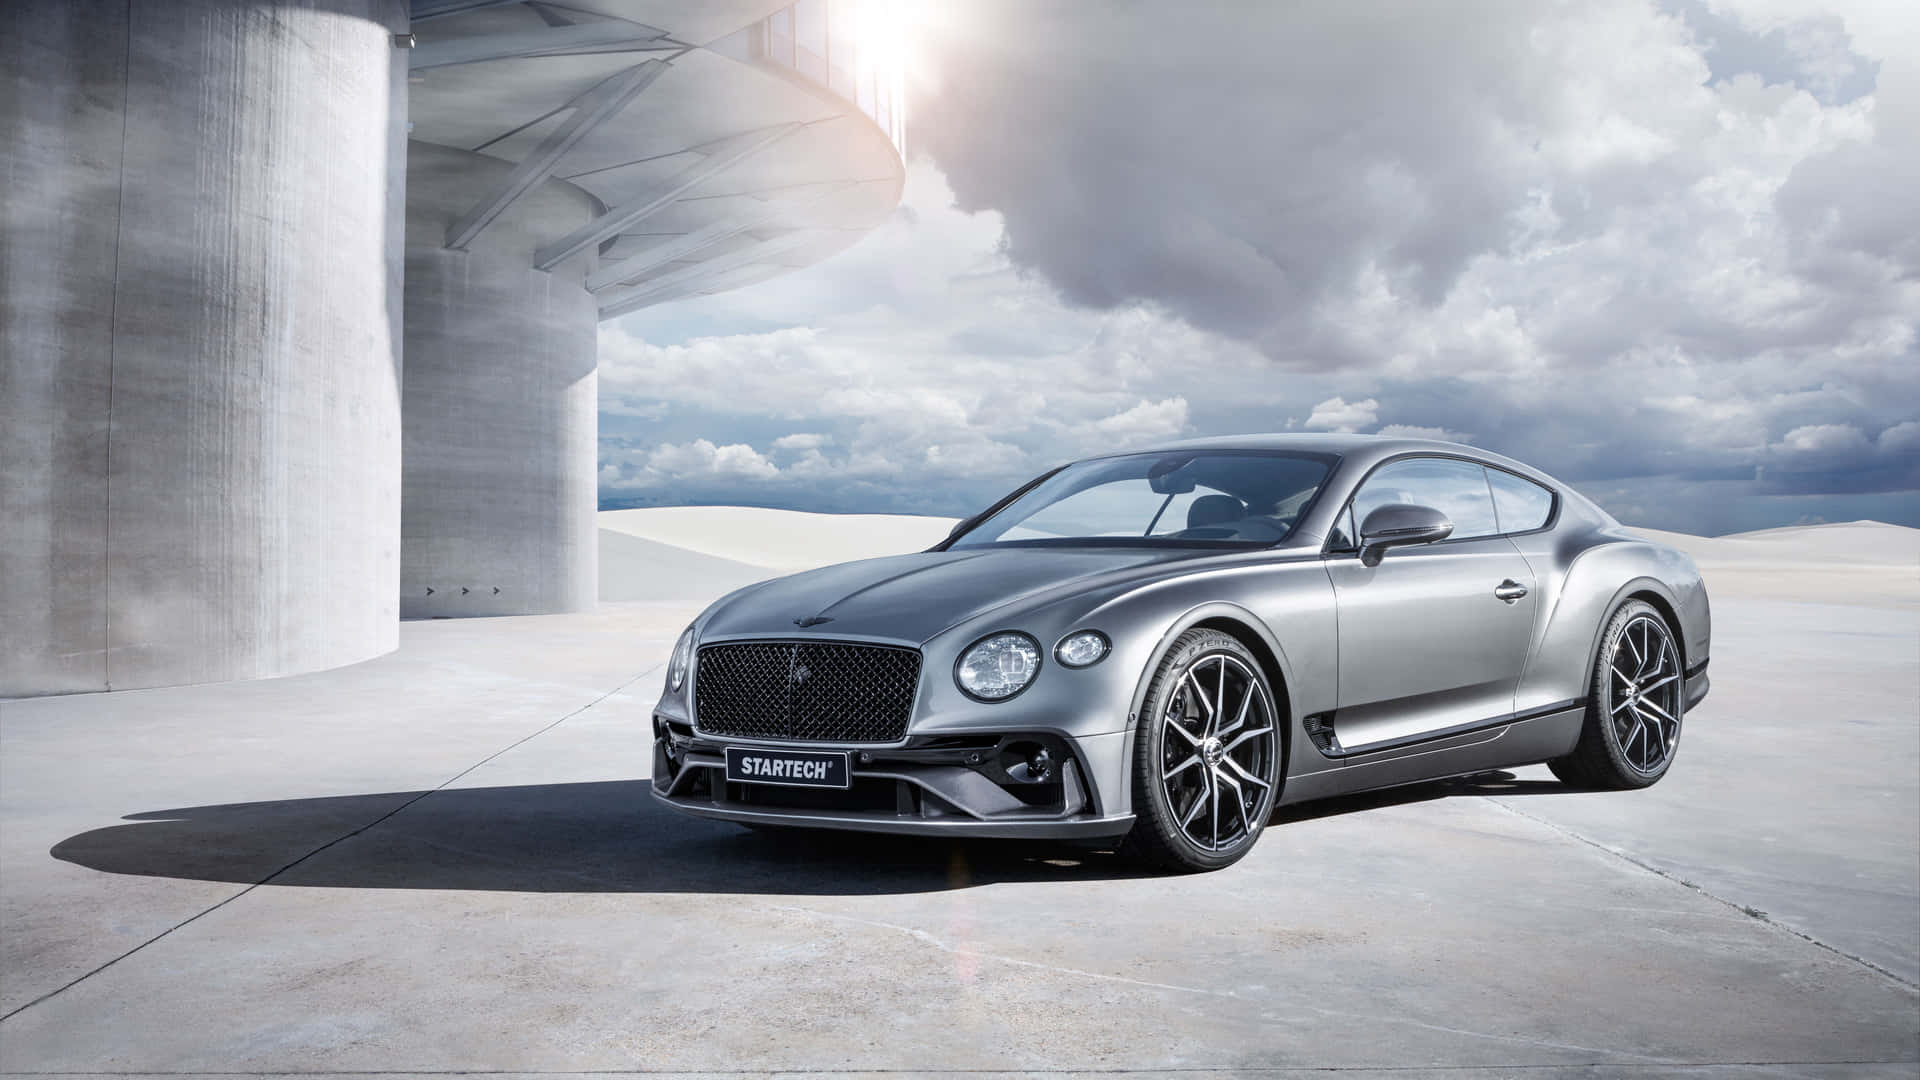 Experience luxury with a Bentley